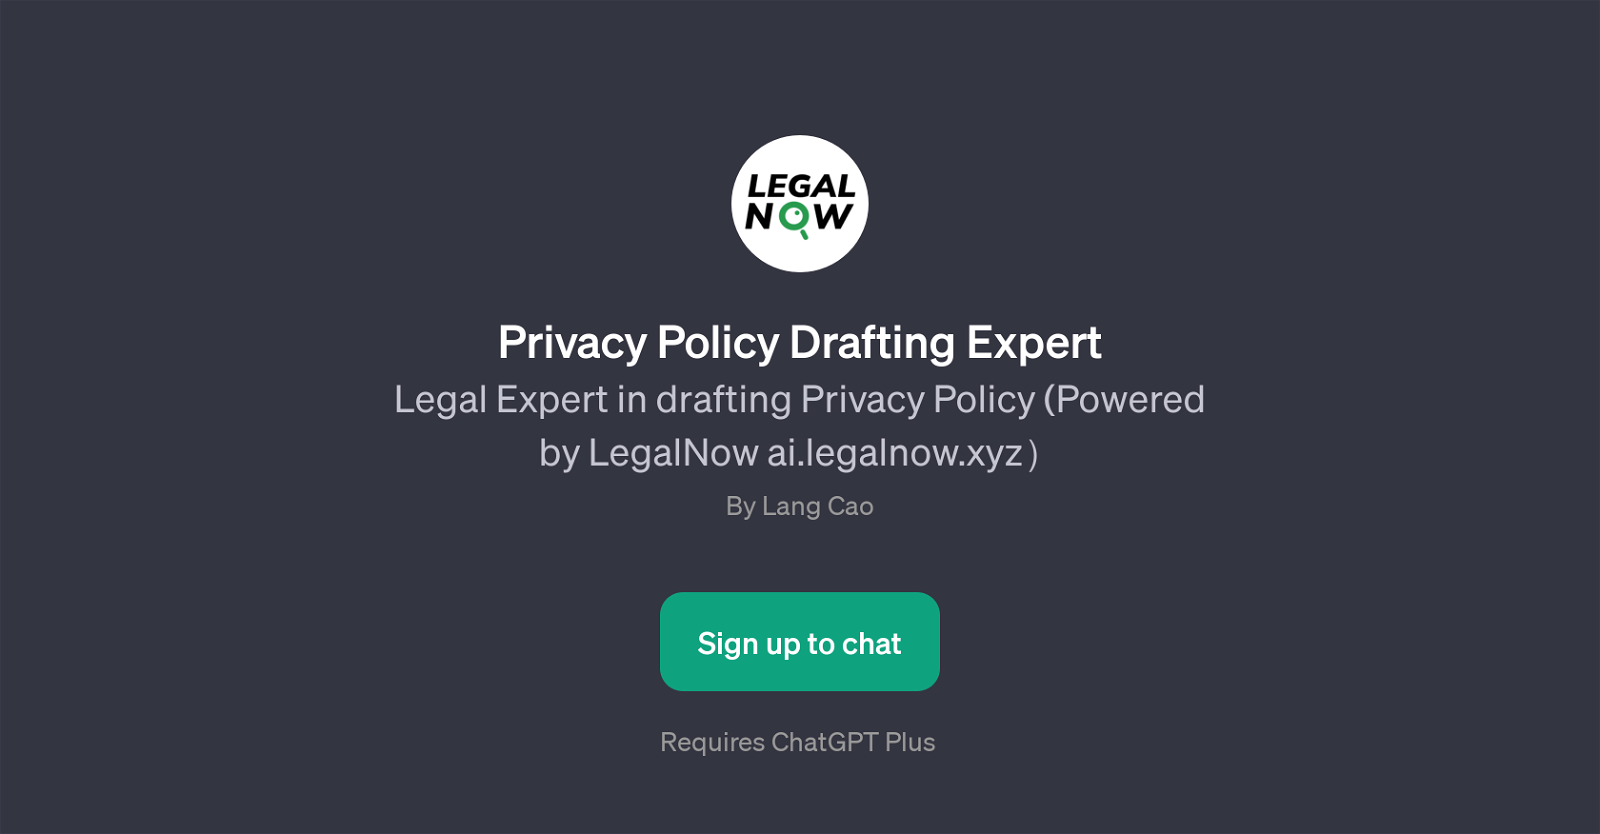 Privacy Policy Drafting Expert website